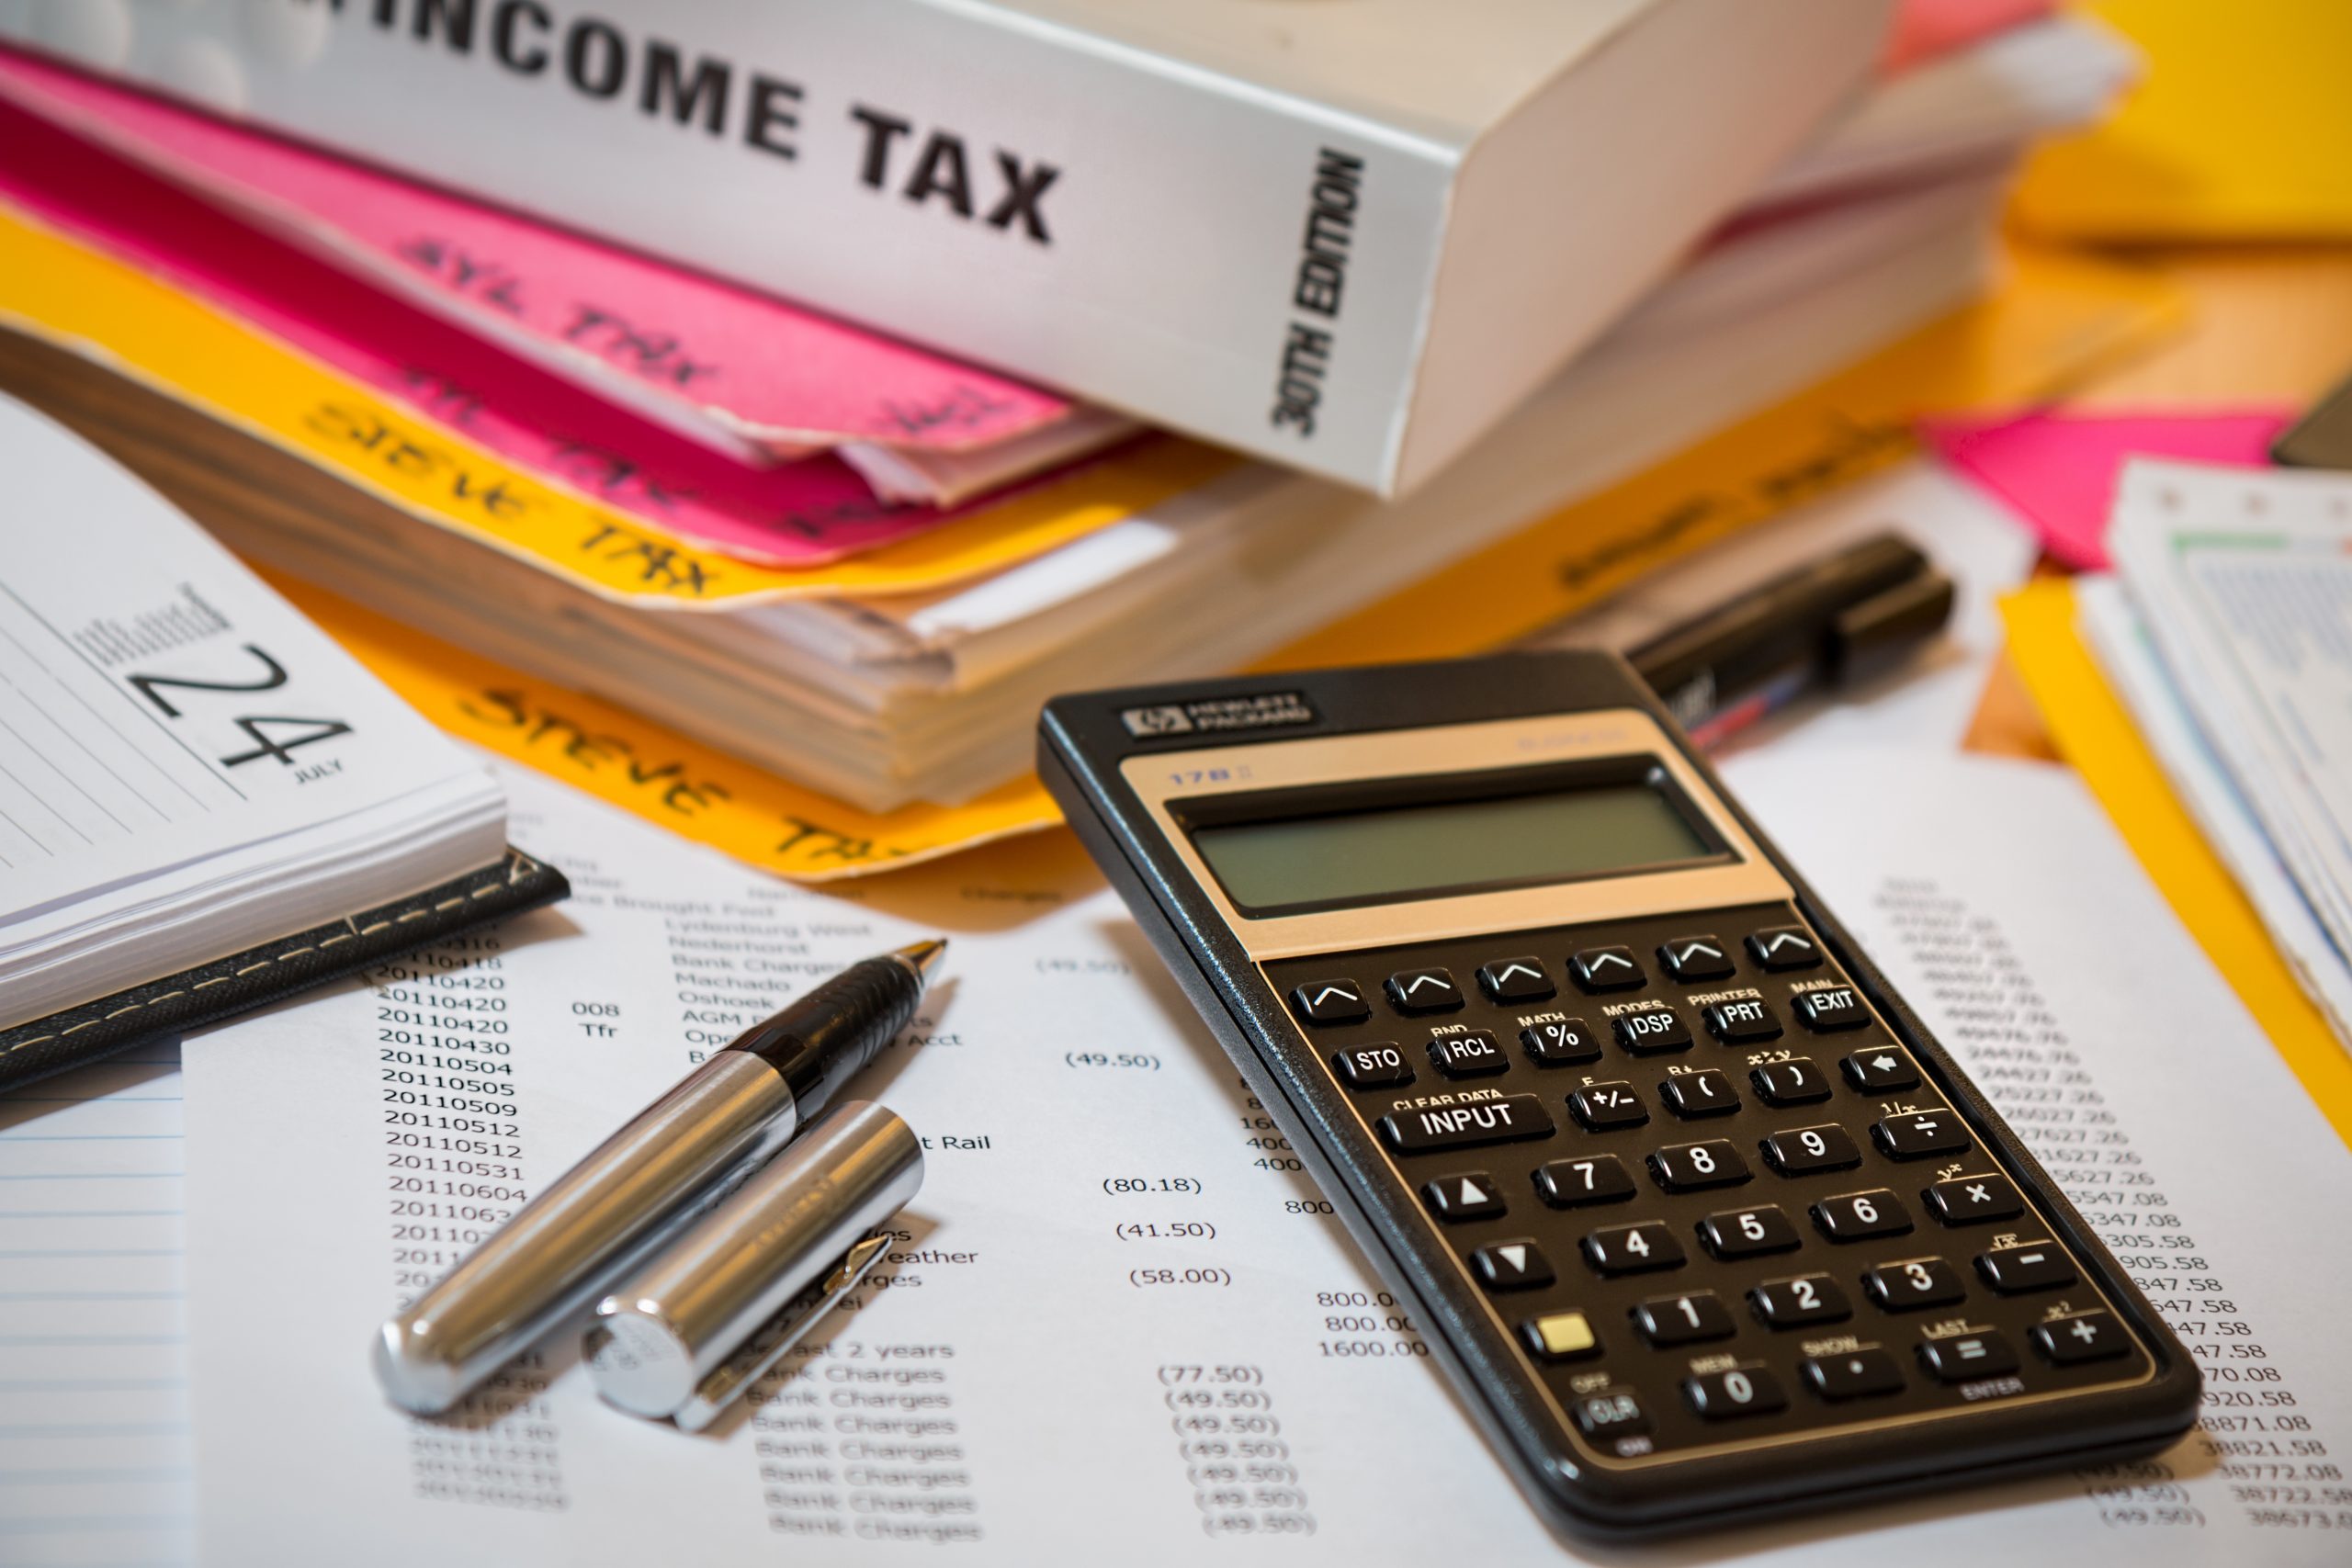 Has Covid Affected Your Taxes